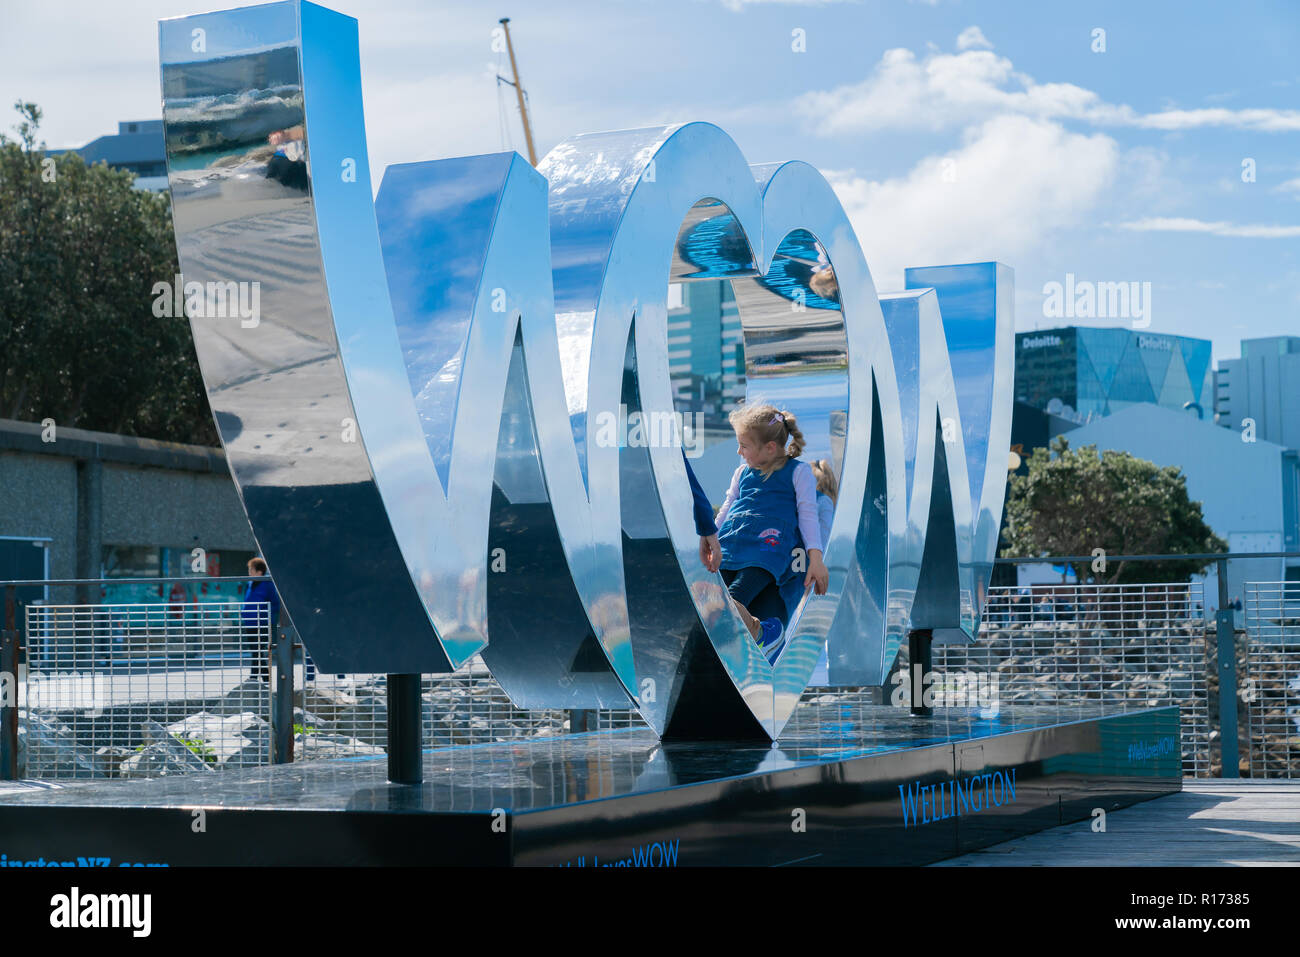 WELLINGTON, NEW ZEALAND - OCTOBER 1 Child plays in centre heart shaped O in World of Wearable Art iconic shiny silver sign on city waterfront reflects Stock Photo